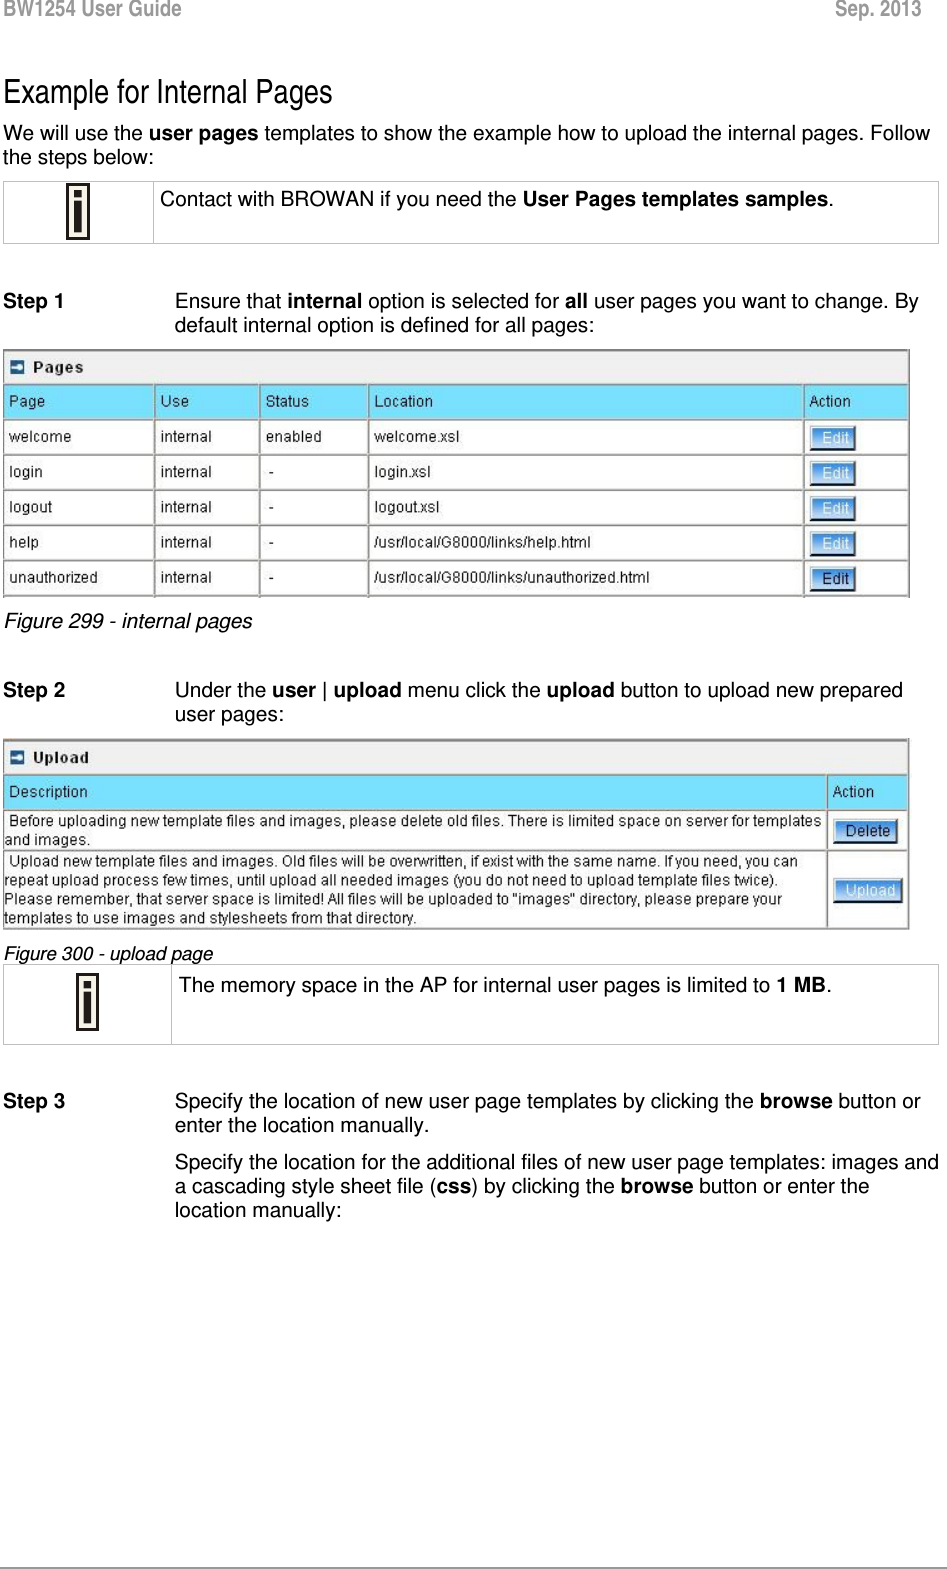 BW1254 User Guide  Sep. 2013  Example for Internal Pages  We will use the user pages templates to show the example how to upload the internal pages. Follow the steps below:  Contact with BROWAN if you need the User Pages templates samples.  Step 1 Ensure that internal option is selected for all user pages you want to change. By default internal option is defined for all pages:  Figure 299 - internal pages  Step 2  Under the user | upload menu click the upload button to upload new prepared user pages:  Figure 300 - upload page  The memory space in the AP for internal user pages is limited to 1 MB.  Step 3  Specify the location of new user page templates by clicking the browse button or enter the location manually.  Specify the location for the additional files of new user page templates: images and a cascading style sheet file (css) by clicking the browse button or enter the location manually: 